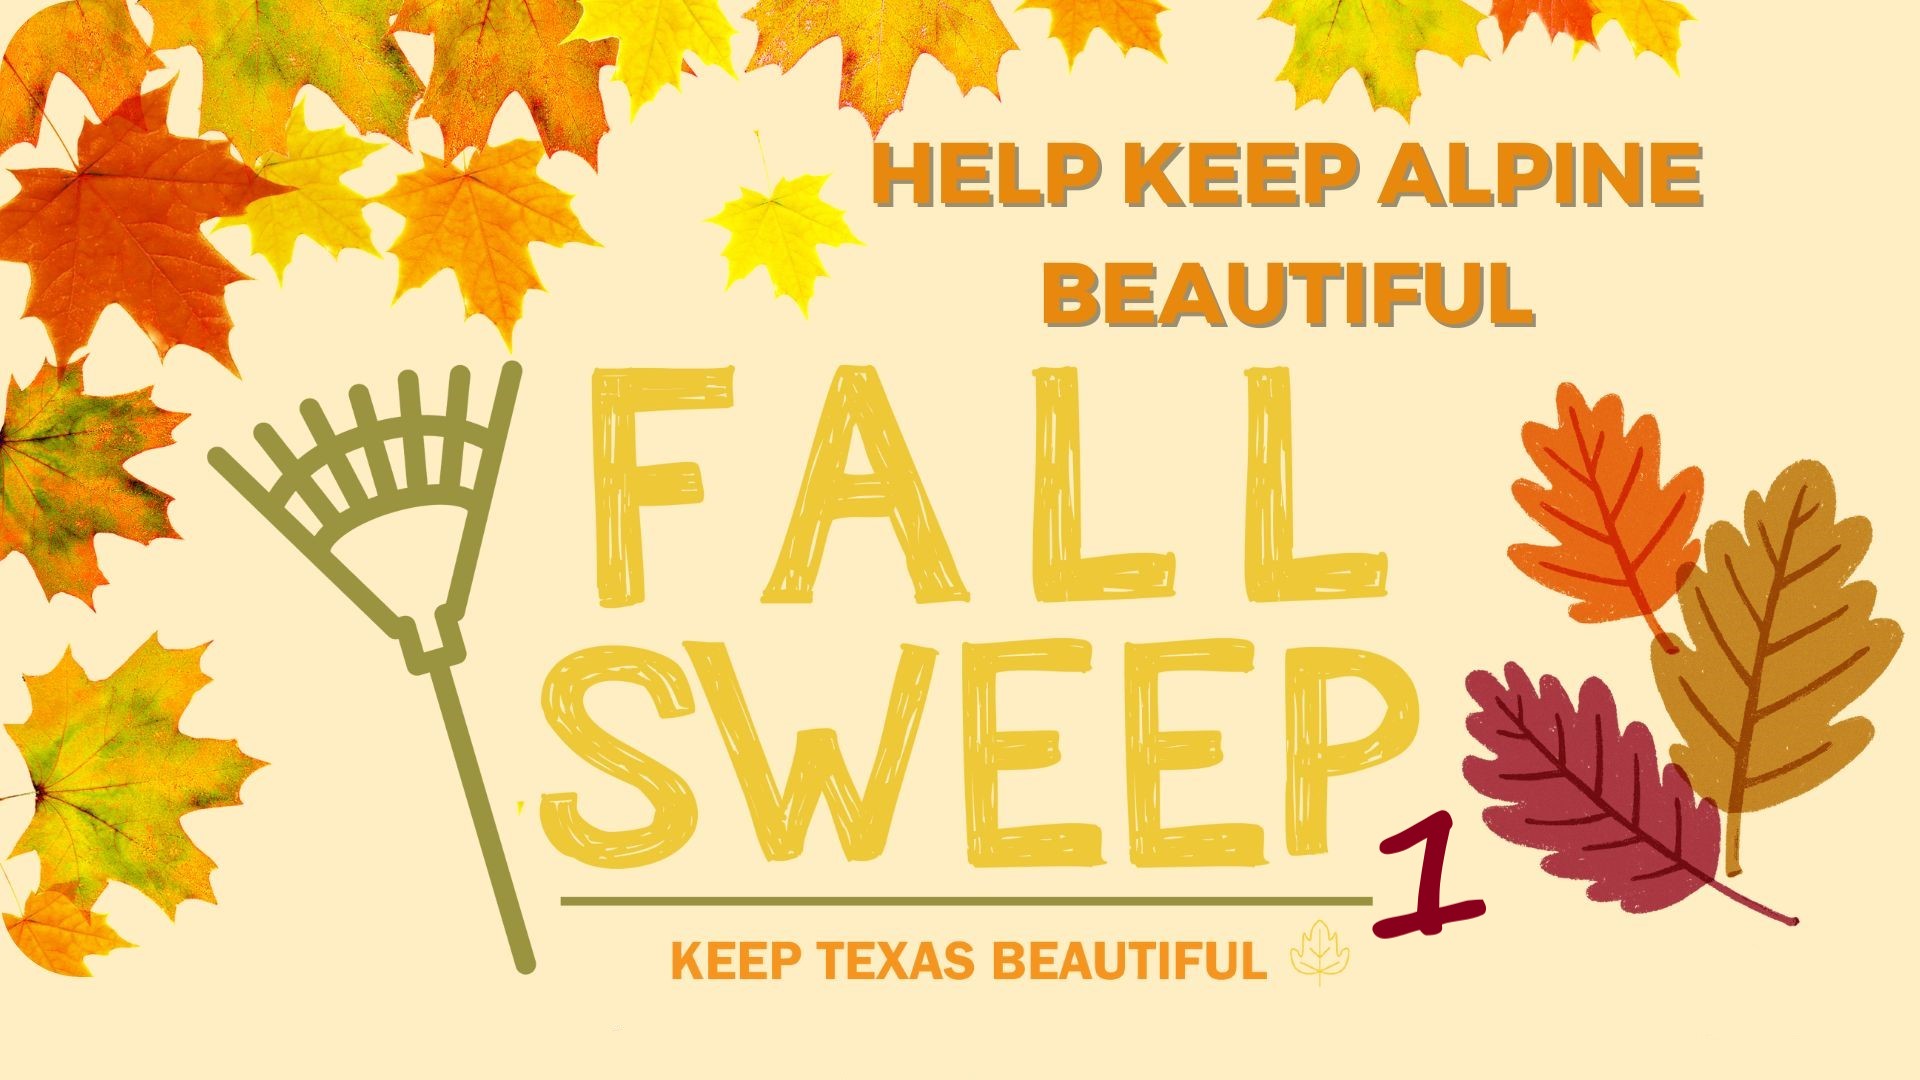 9-15-23 Community Cleanup Fall Sweep